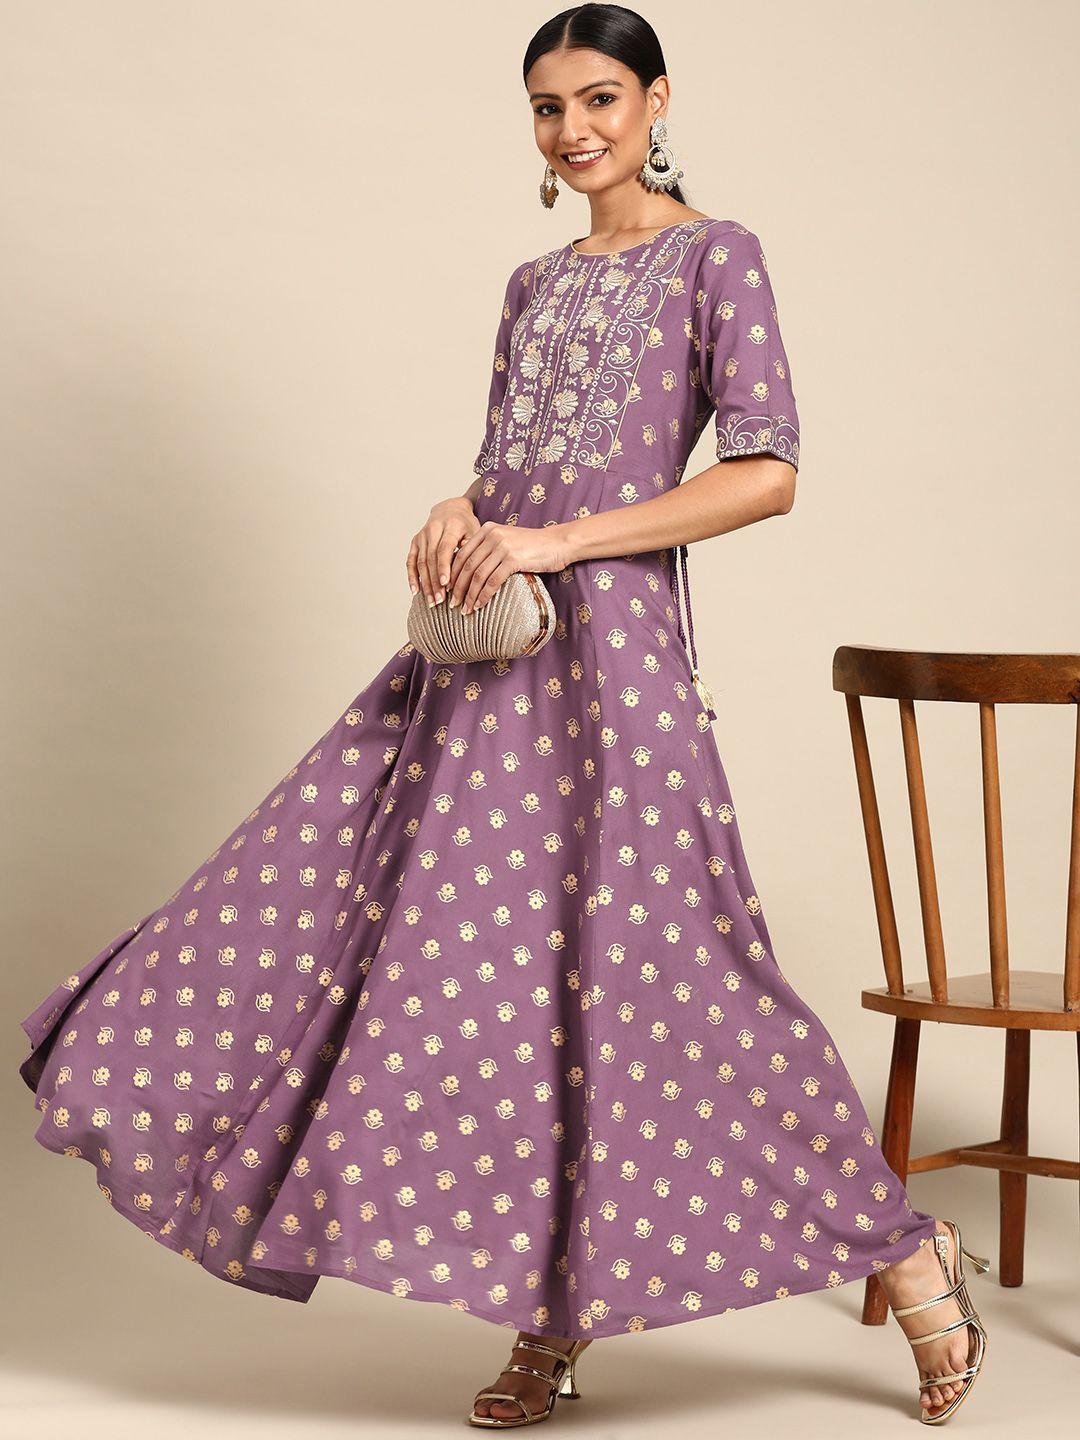 all-about-you-women-lavender-&-gold-toned-floral-printed-a-line-maxi-ethnic-dress